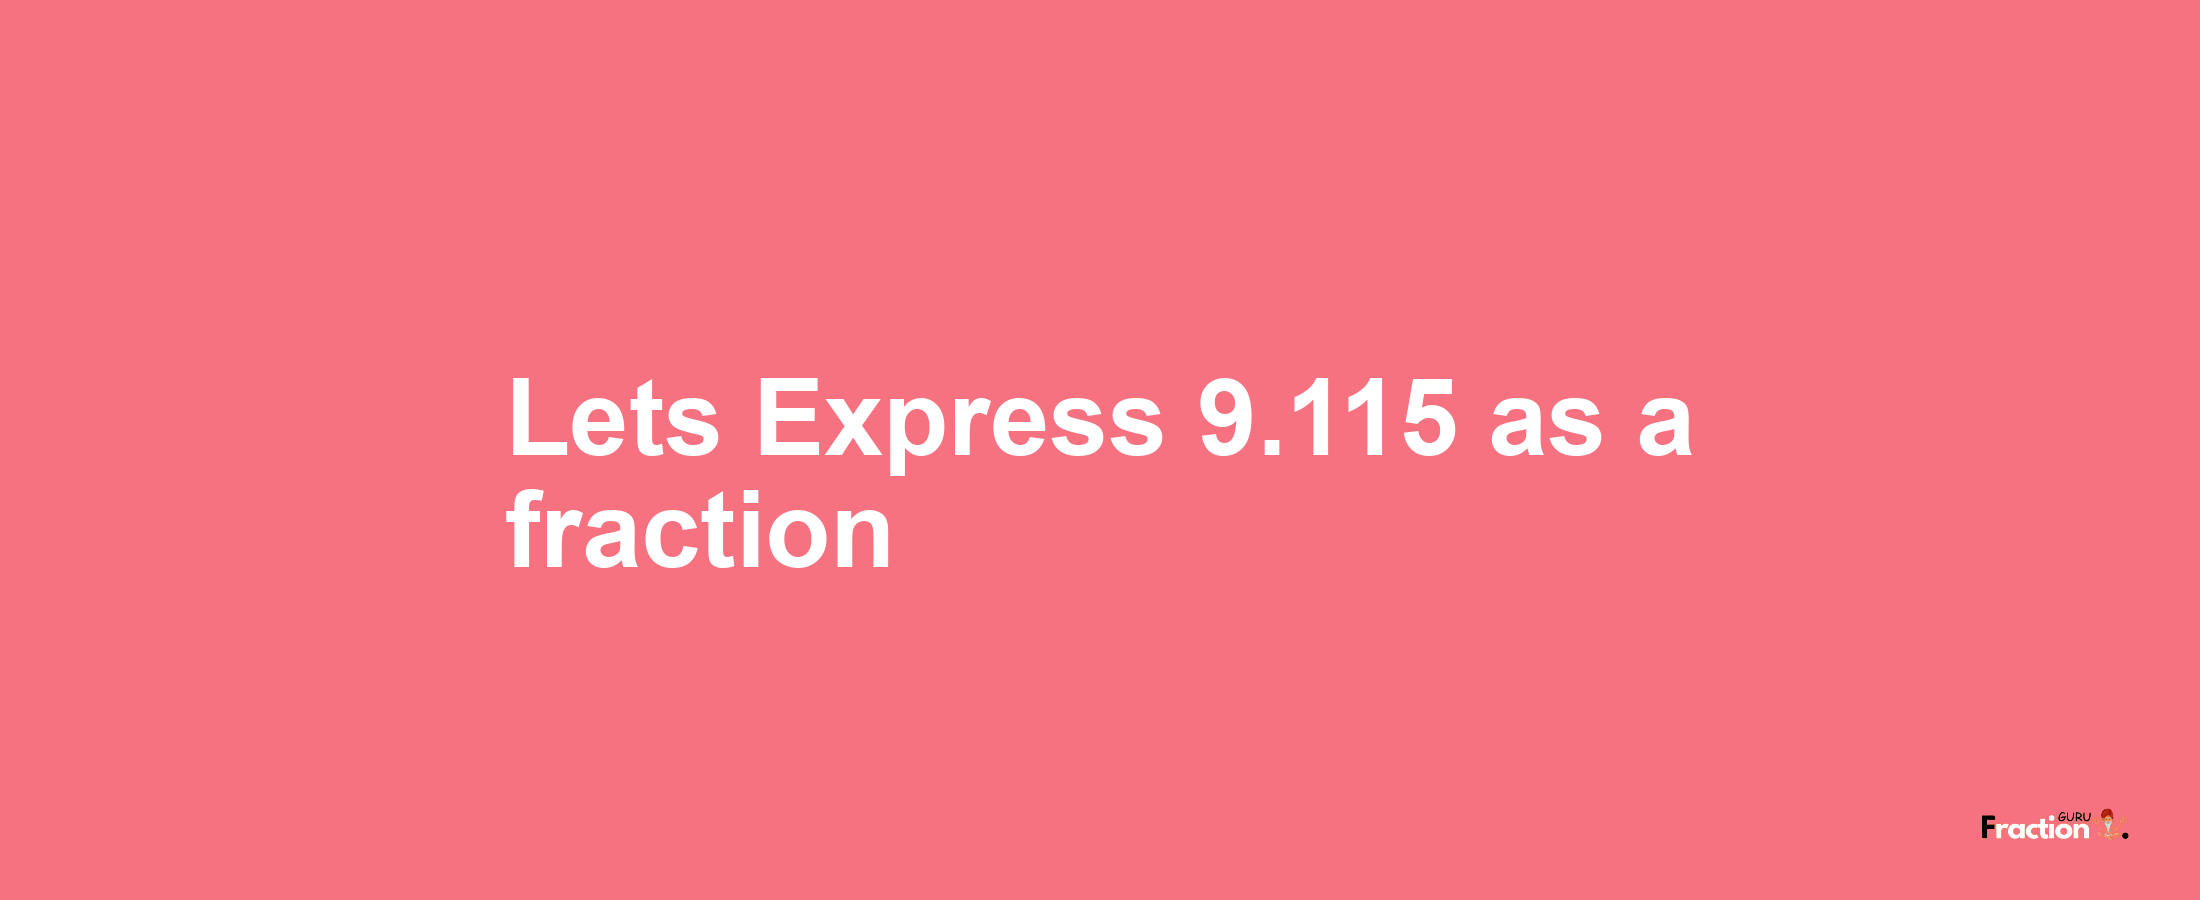 Lets Express 9.115 as afraction